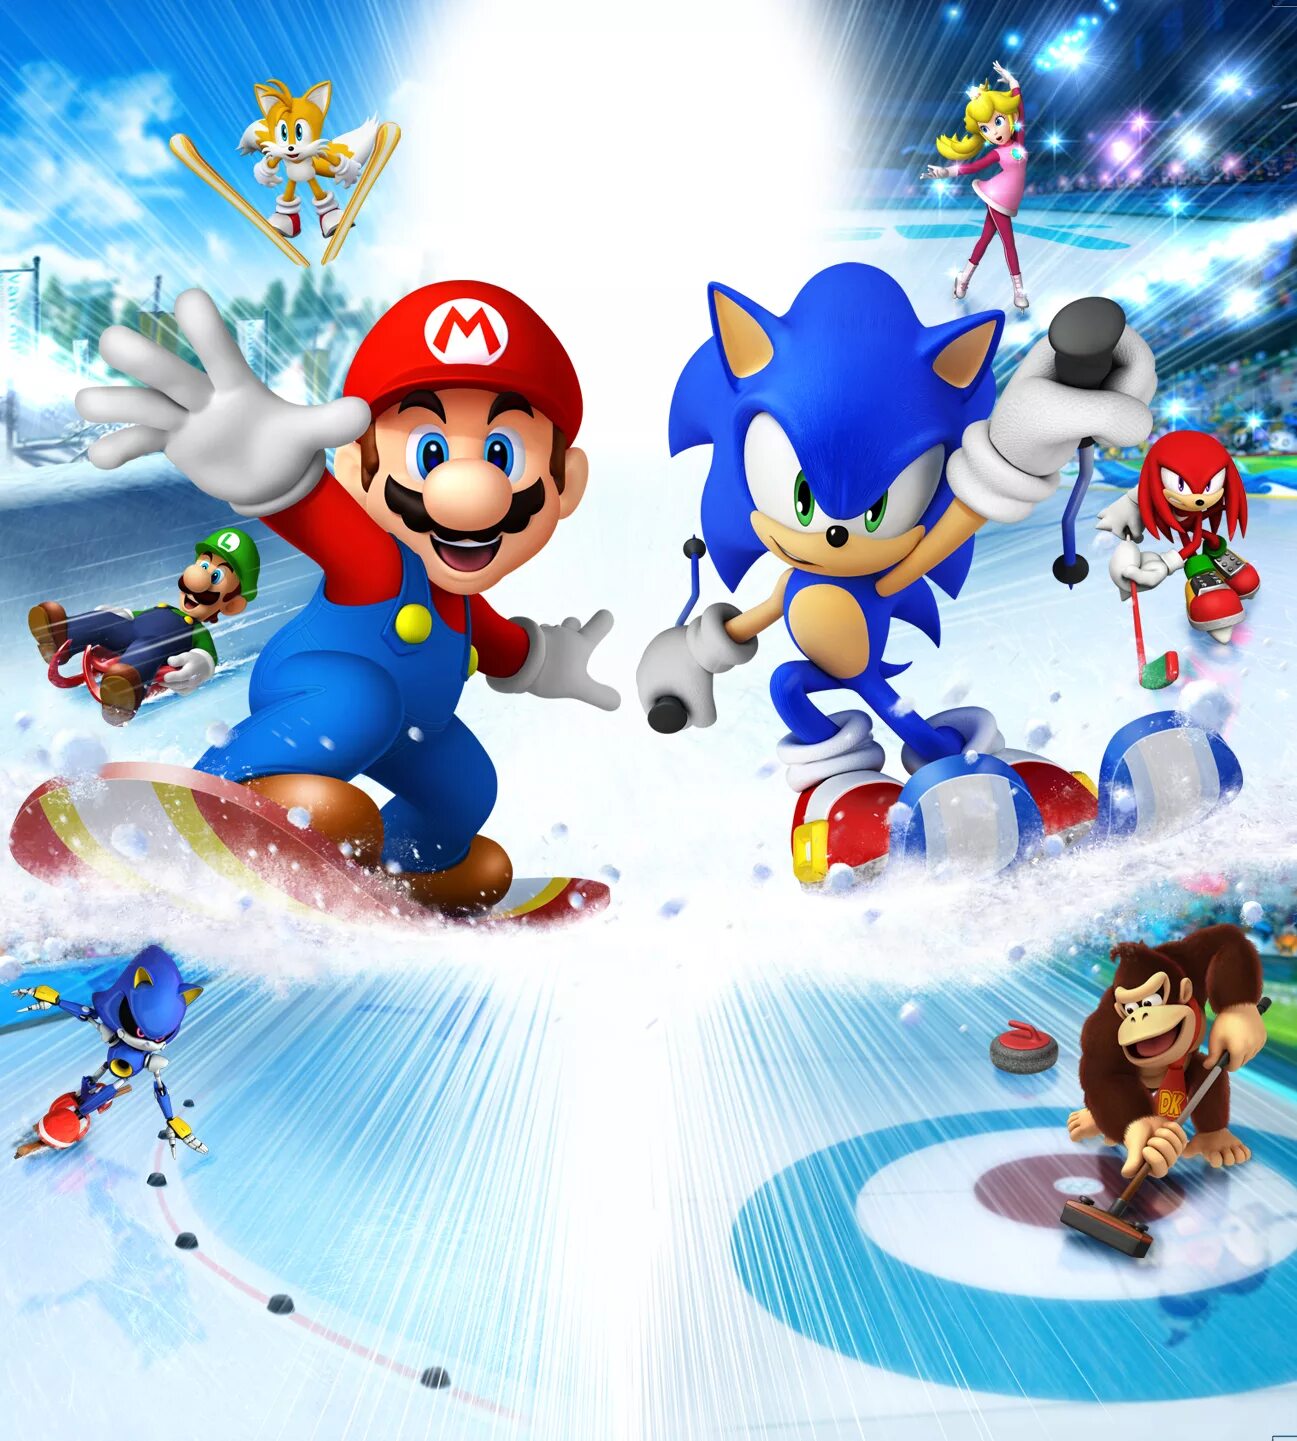 Mario & Sonic at the Olympic Winter games. Mario and Sonic. Mario & Sonic at the Olympic games. Mario & Sonic at the Olympic Winter.